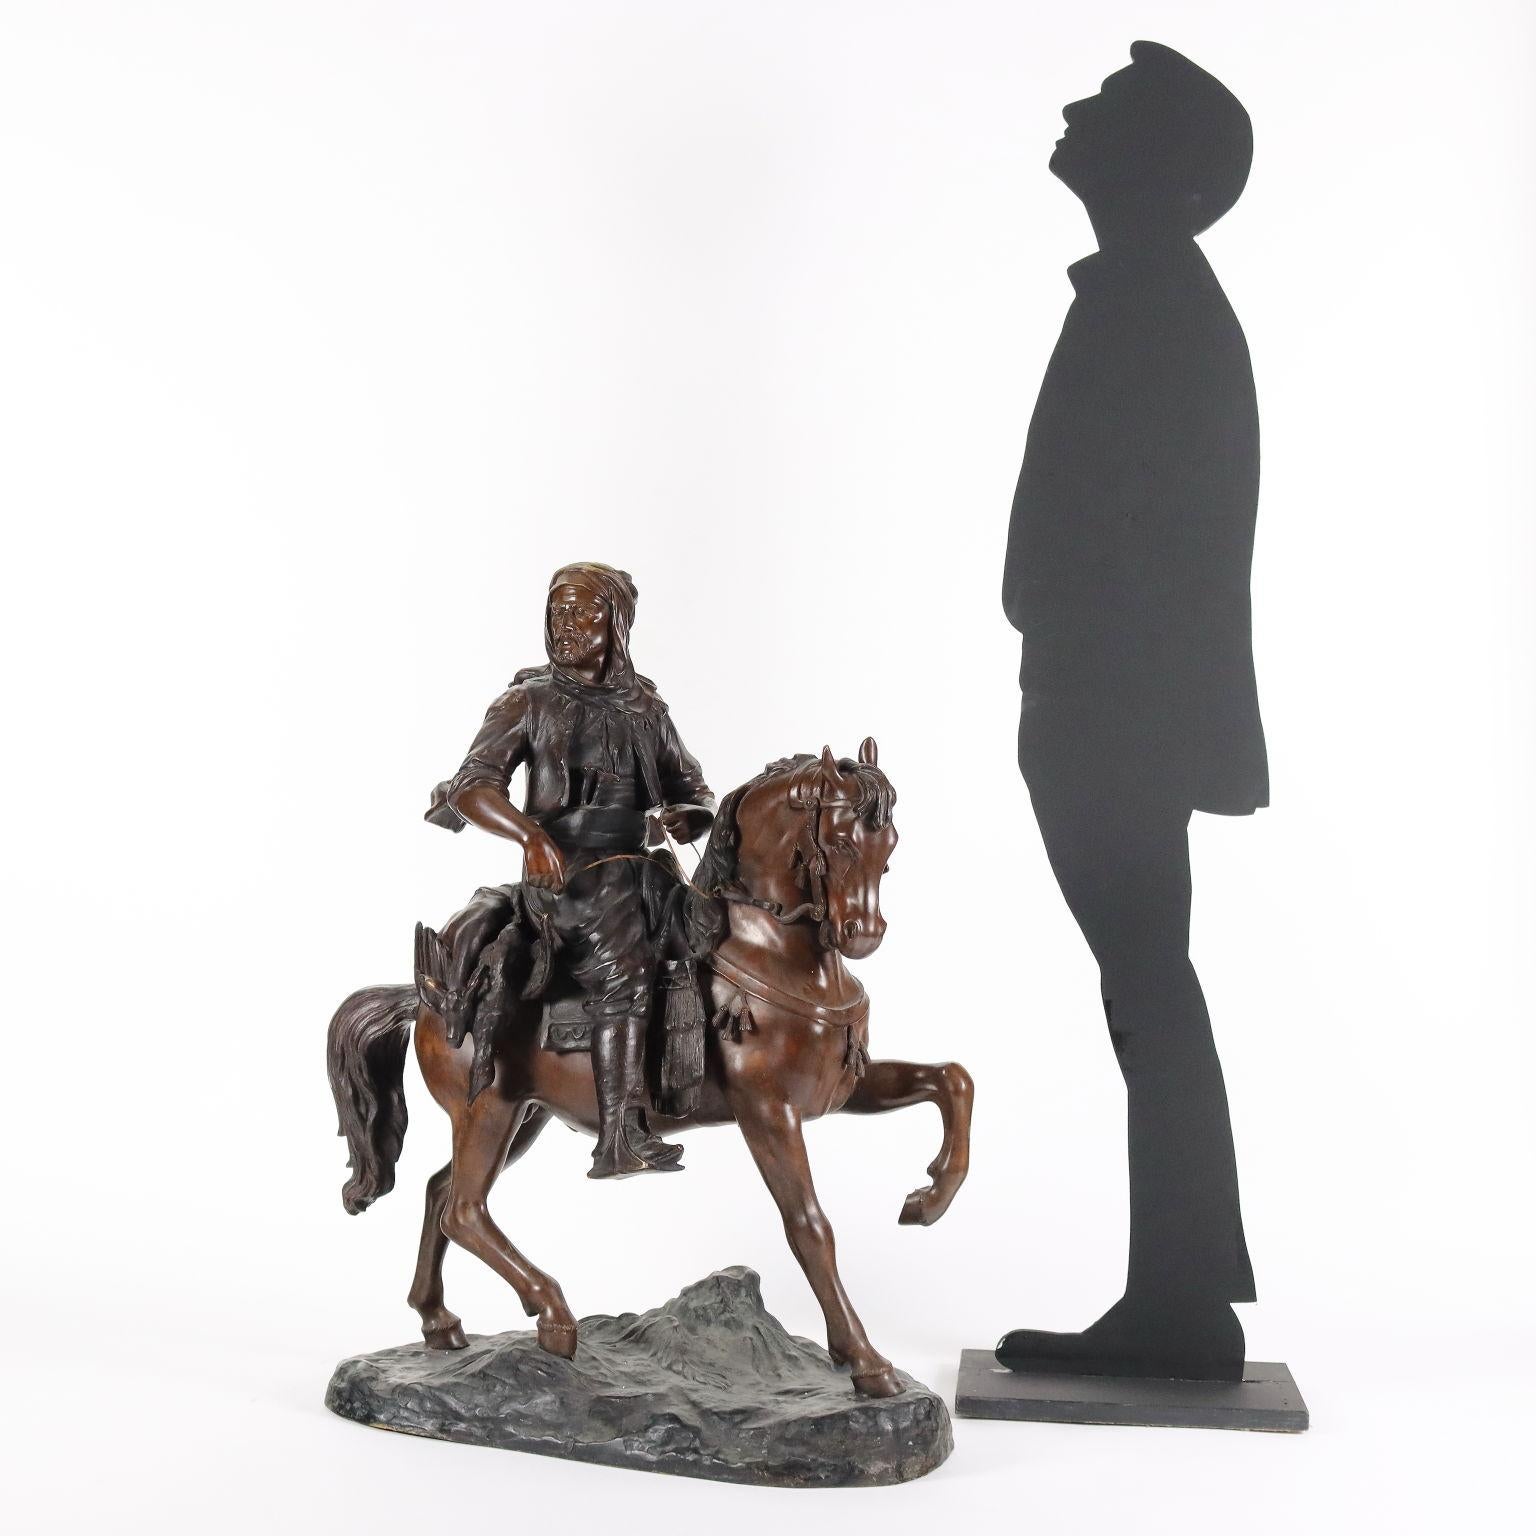 Large bronze sculpture depicting a Bedouin on horseback with game. Based on the manufacturer's brand engraved.